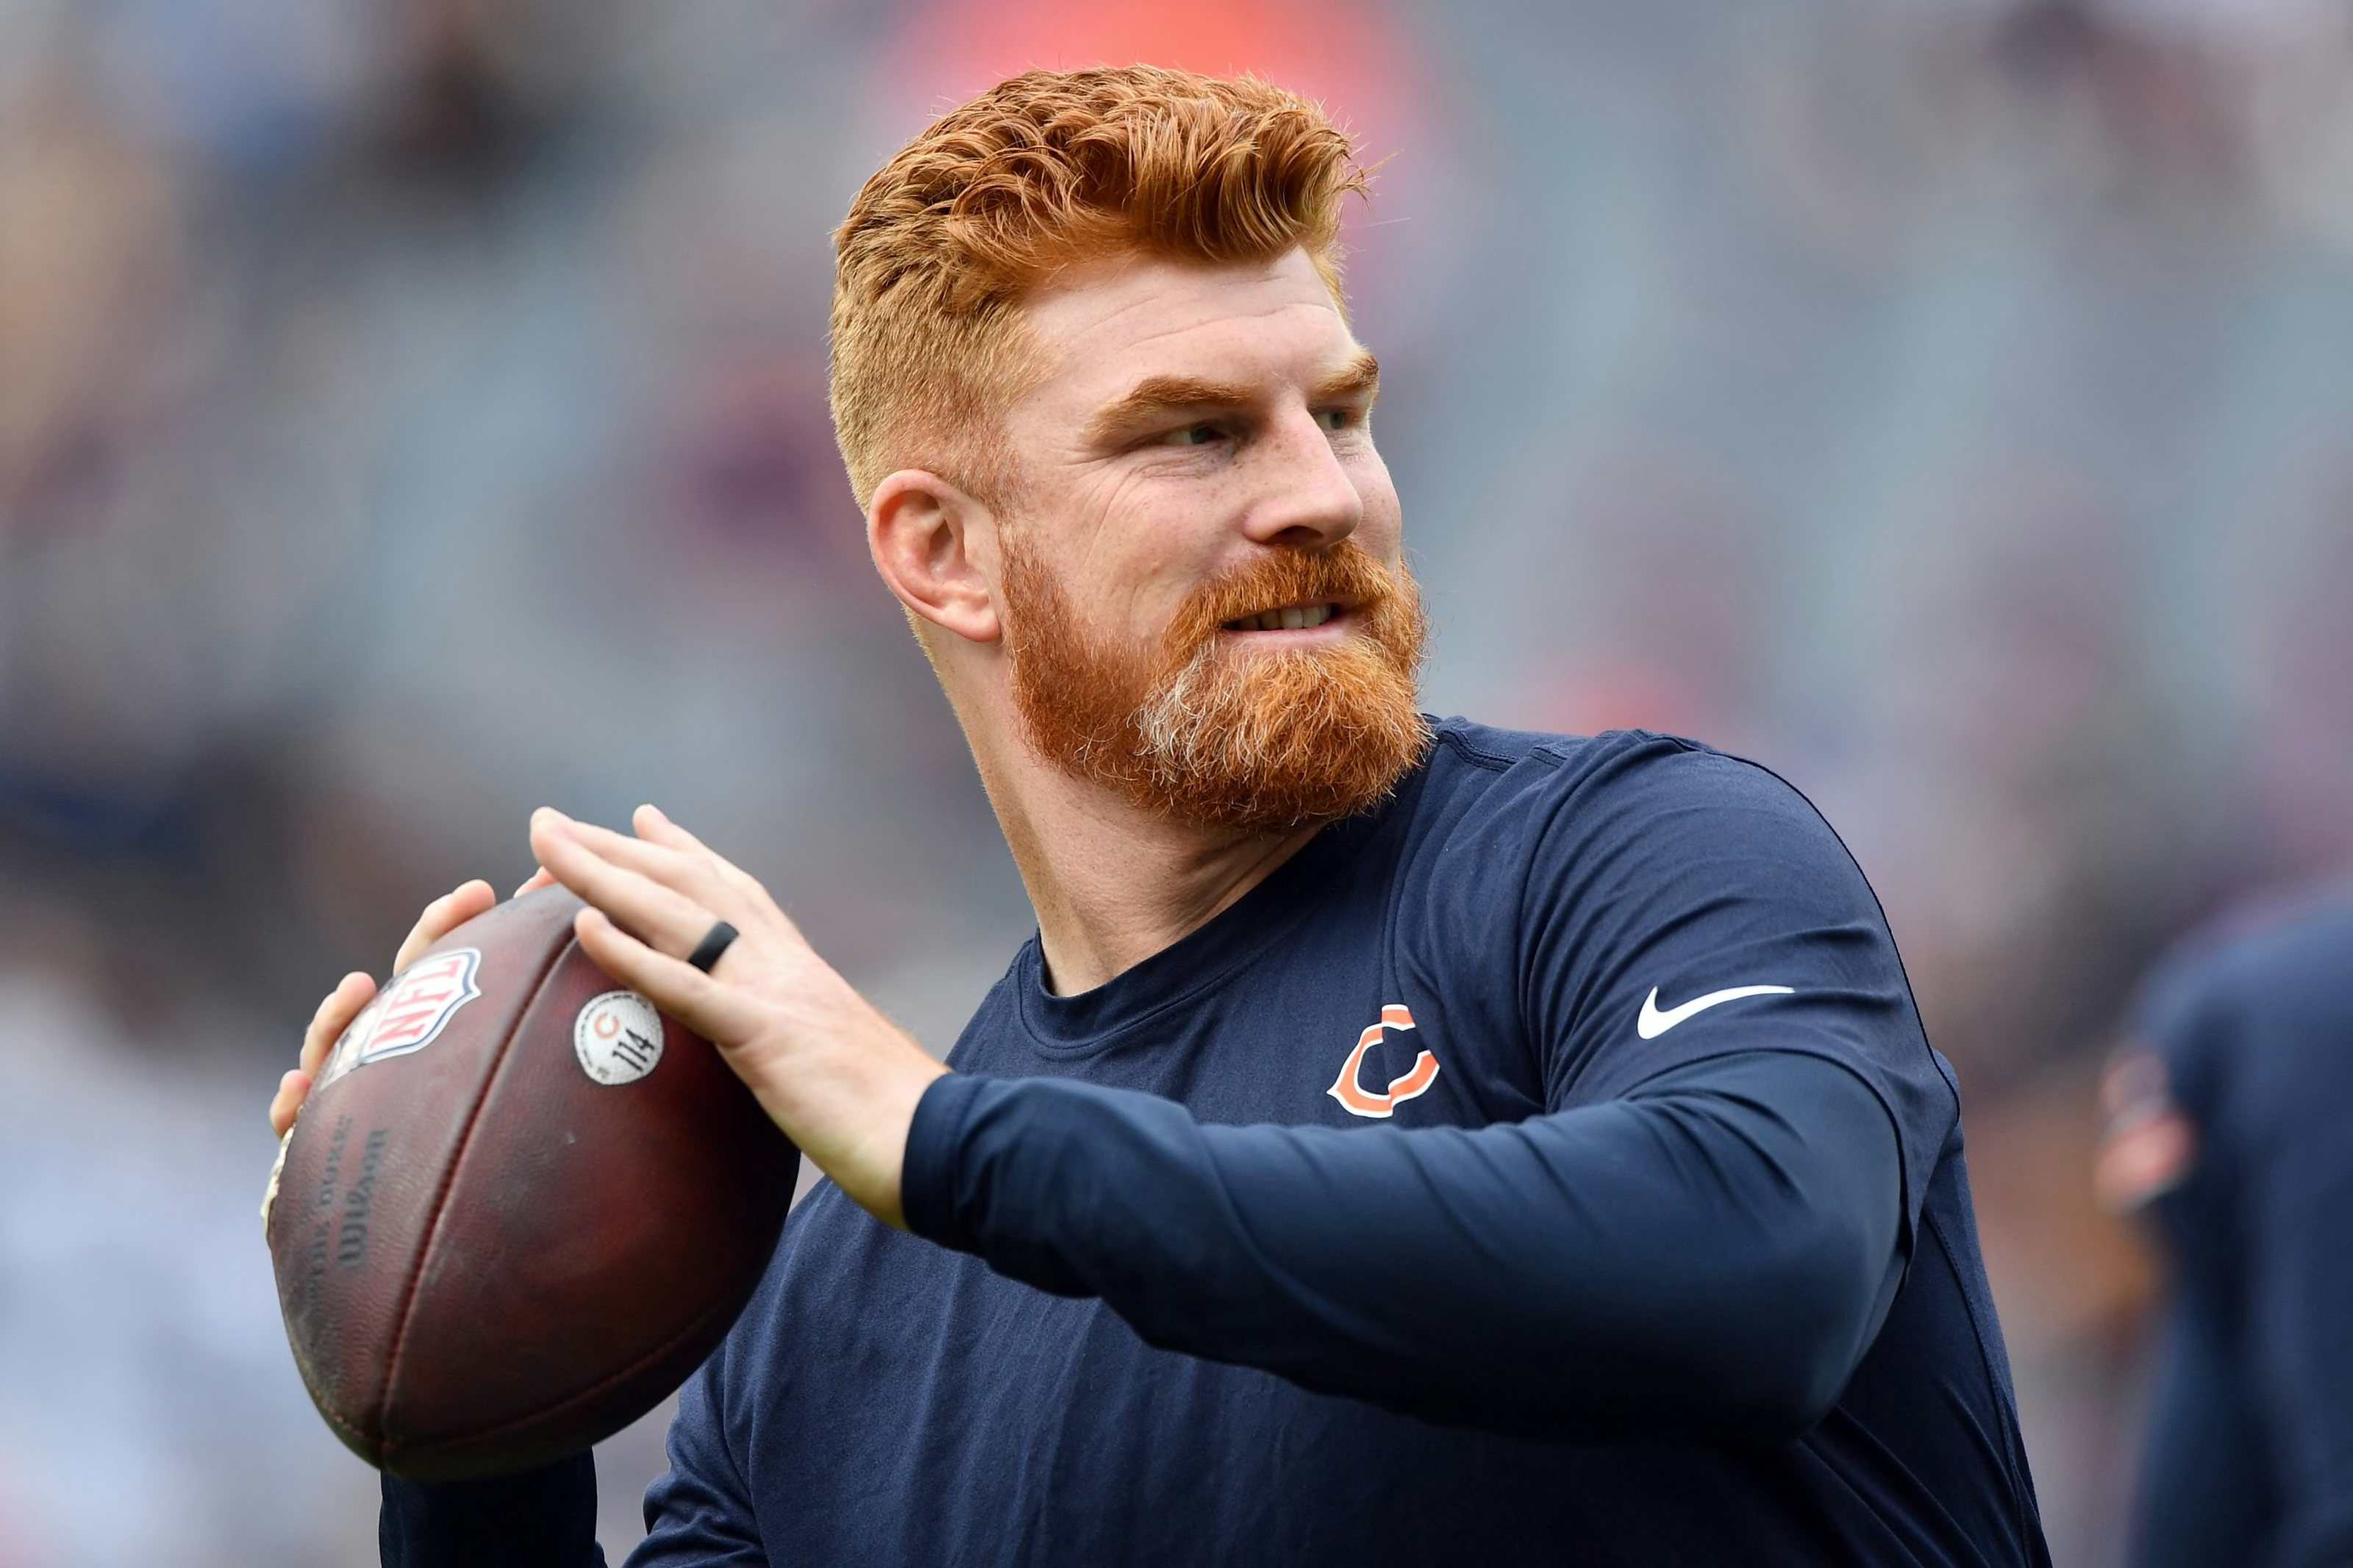 Chicago Bears trade quarterback Andy Dalton in these 2 deals - Page 3